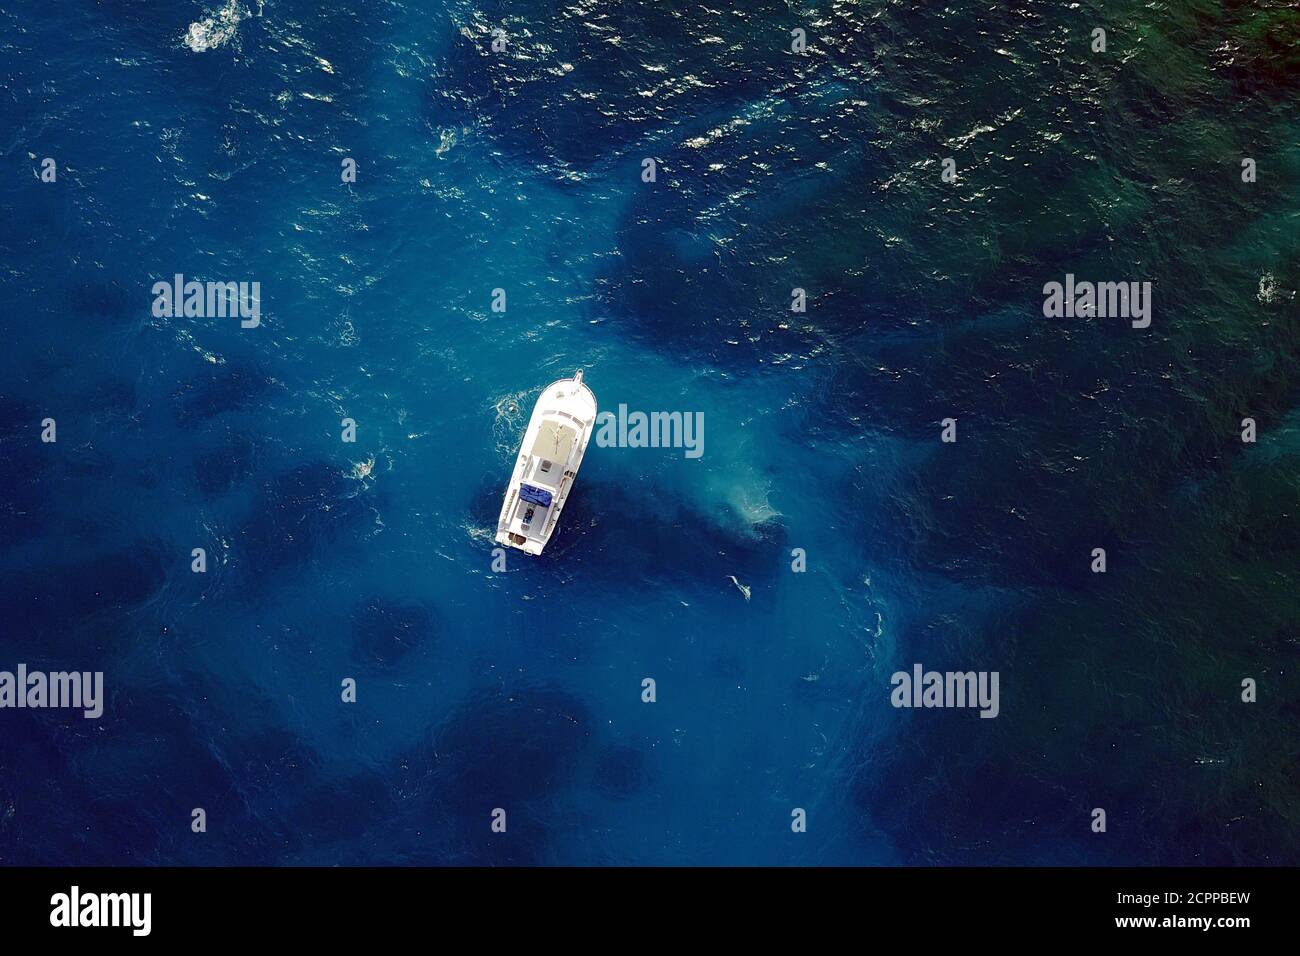 Aerial image of a diving boat above blue clear waters. Location: Ochos Rios, Jamaica, Caribbean Sea. Stock Photo